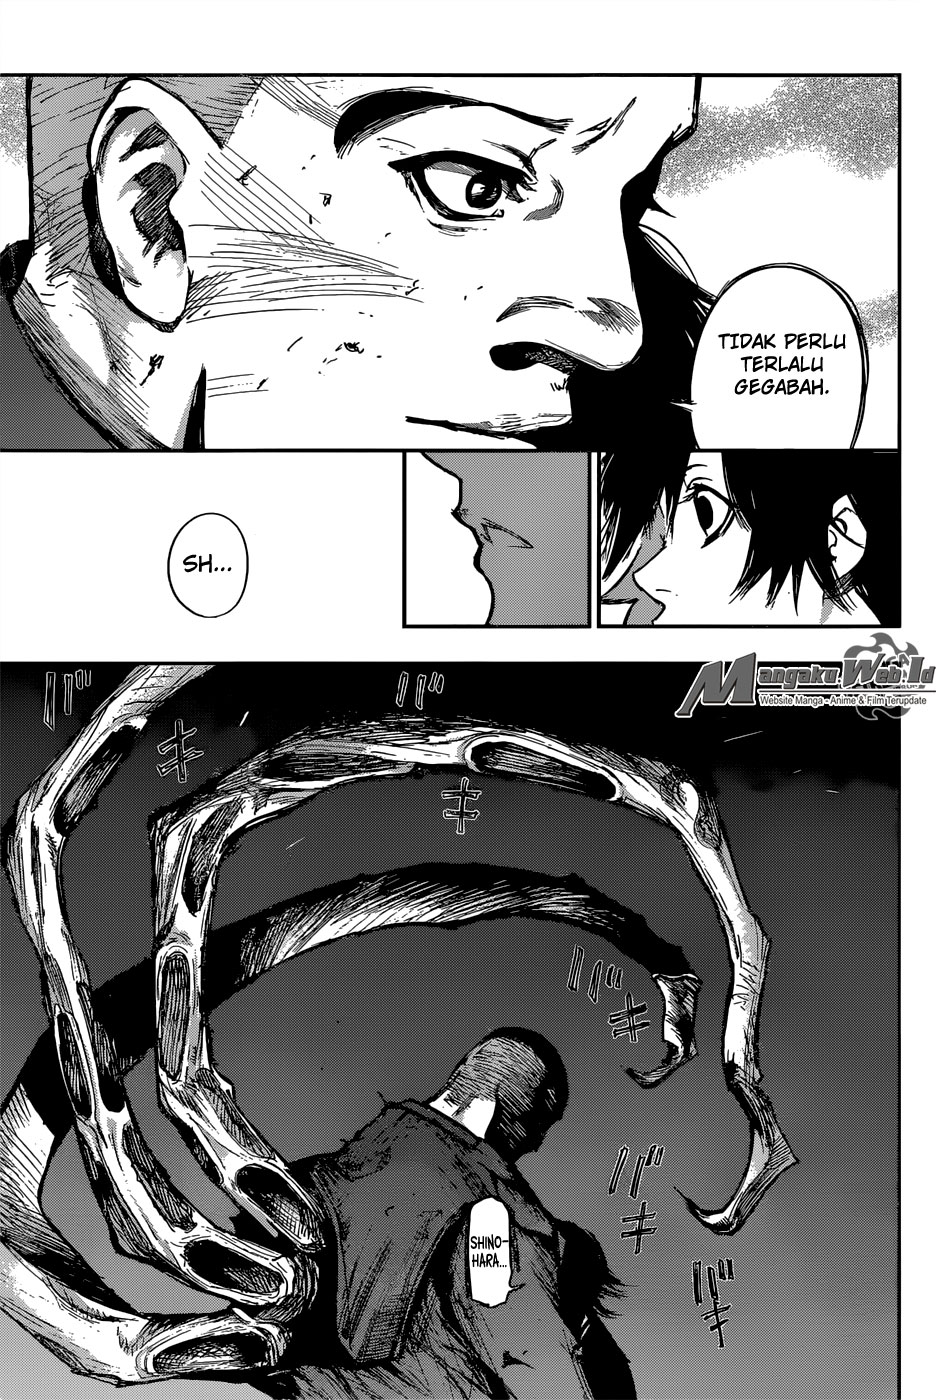 Tokyo Ghoul:re Chapter 110